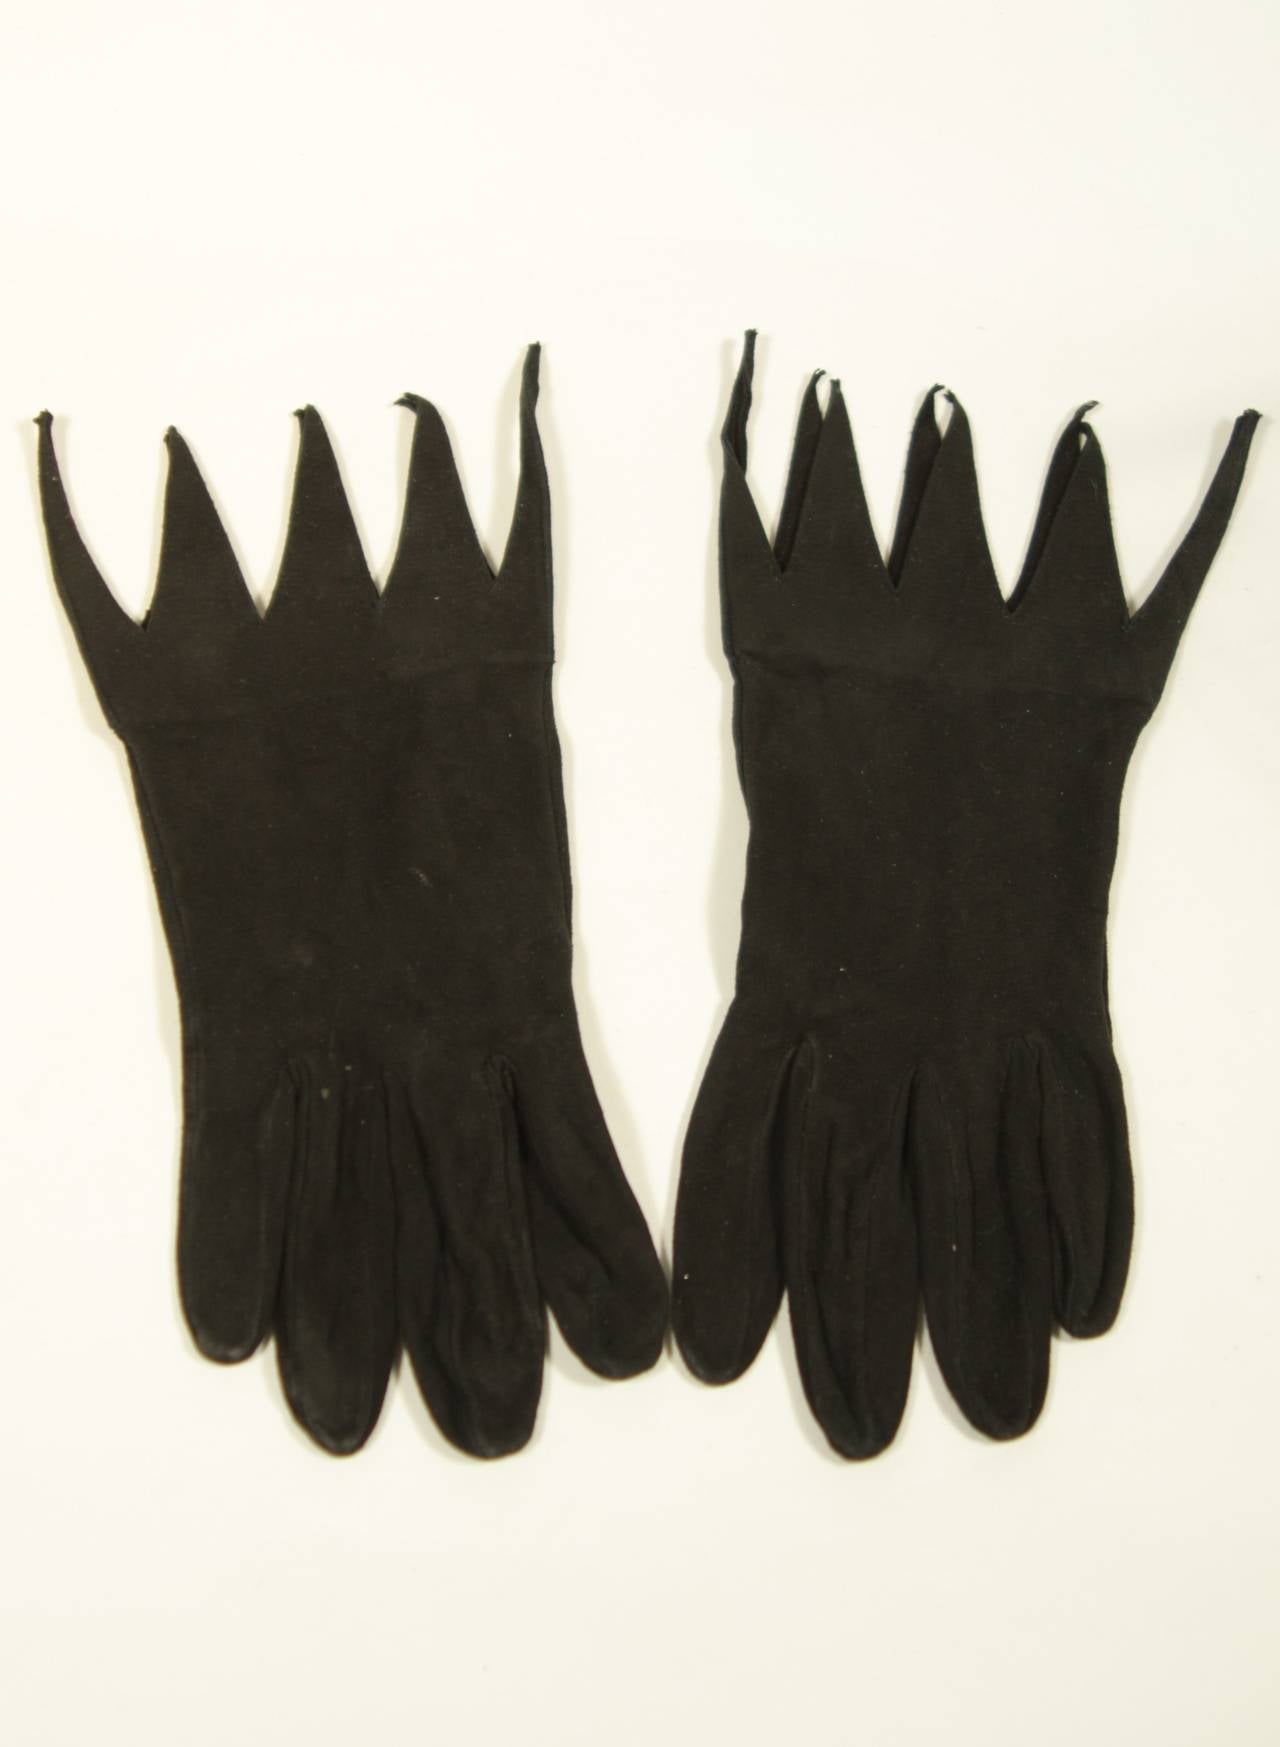 This pair of Moschino black suede gloves are line in cashmere.
Size 7 1/4
Made in Italy.